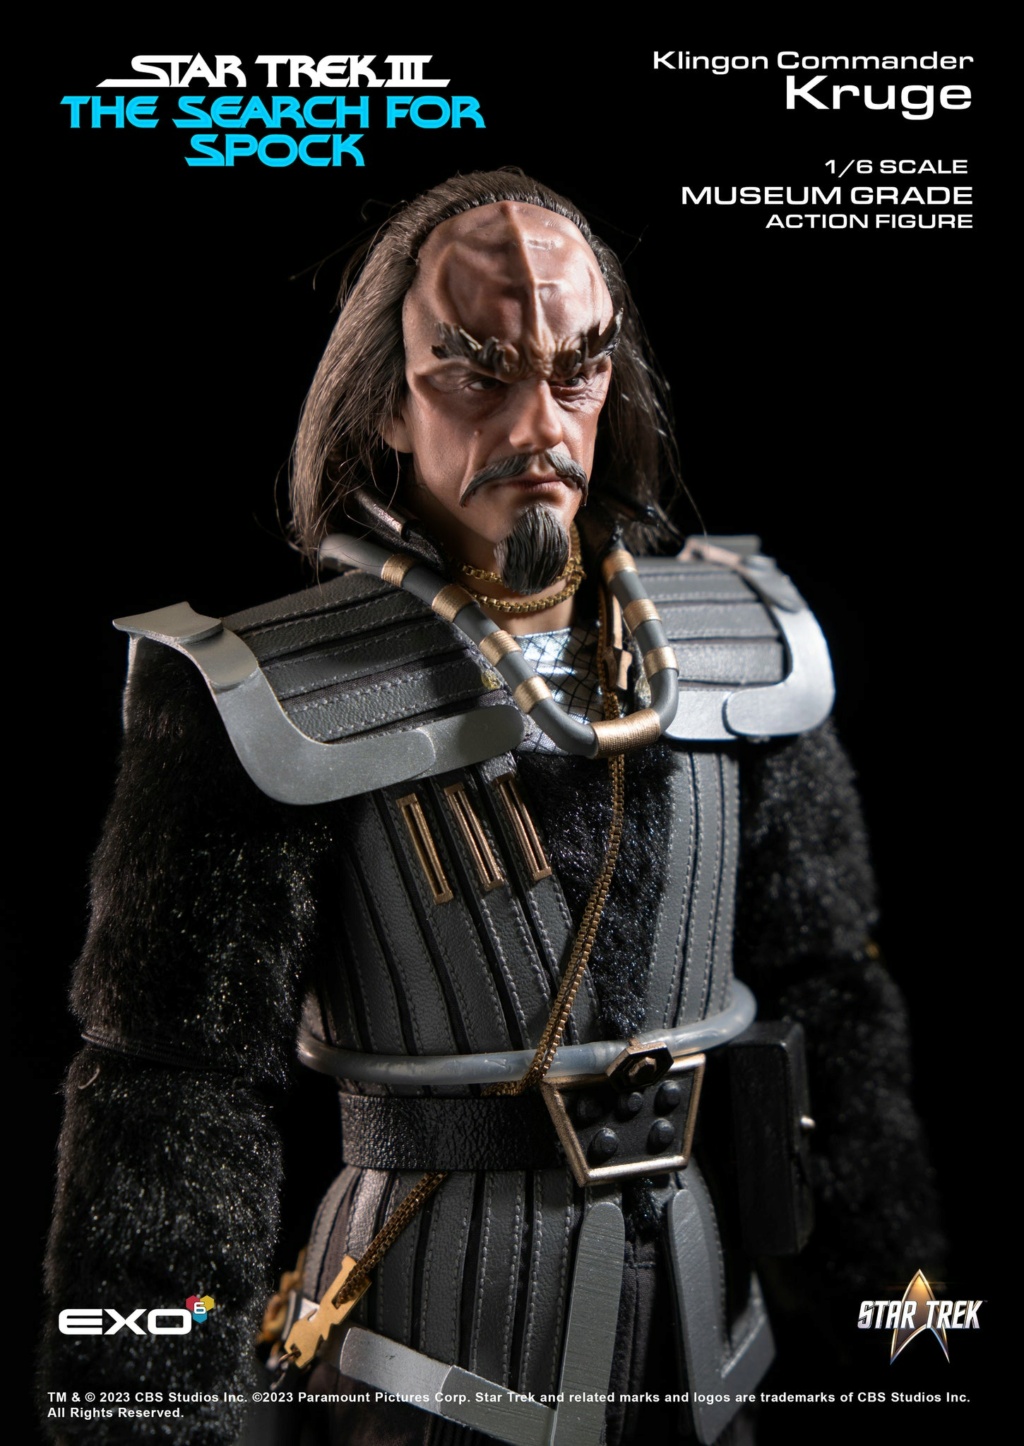 NEW PRODUCT: EXO-6: Star Trek III: The Search For Spock: Klingon Commander Kruge 1/6 scale action figure 1463